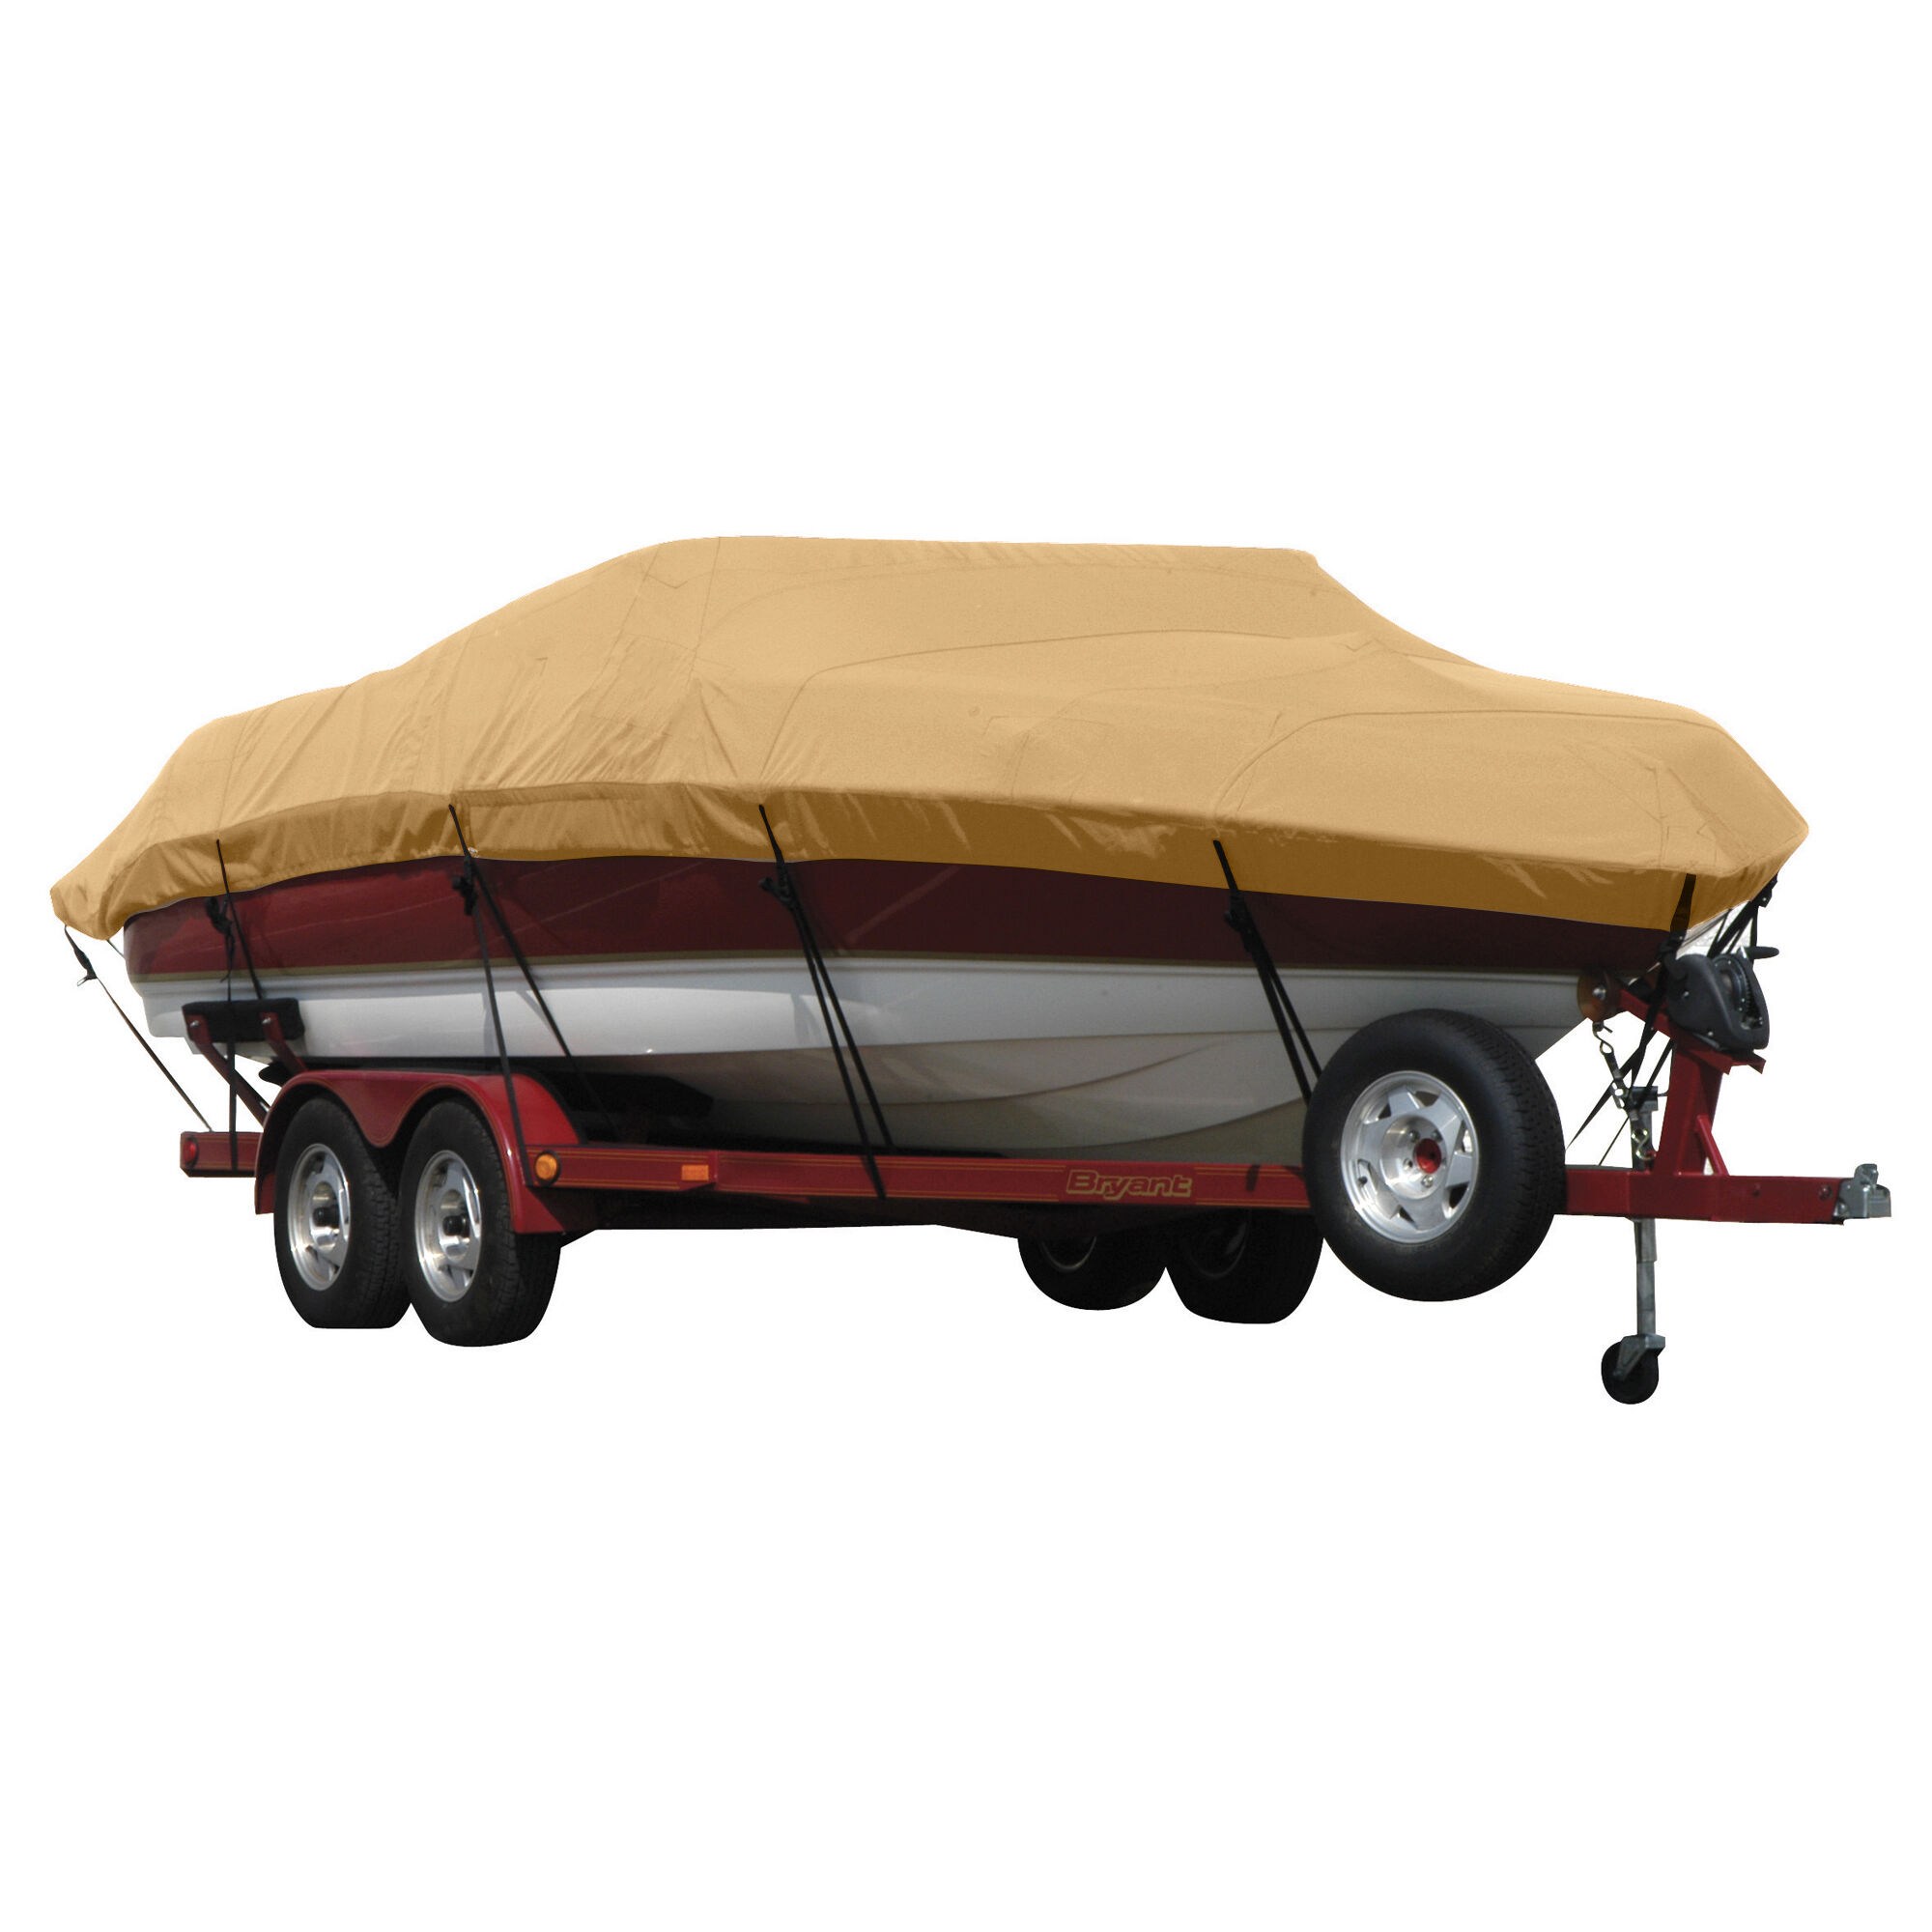 Covermate Exact Fit Sunbrella Boat Cover for Tige 24 Ve 24 Ve w/ Factory Tower Does Not Cover PLATFORMm I/O. Toast